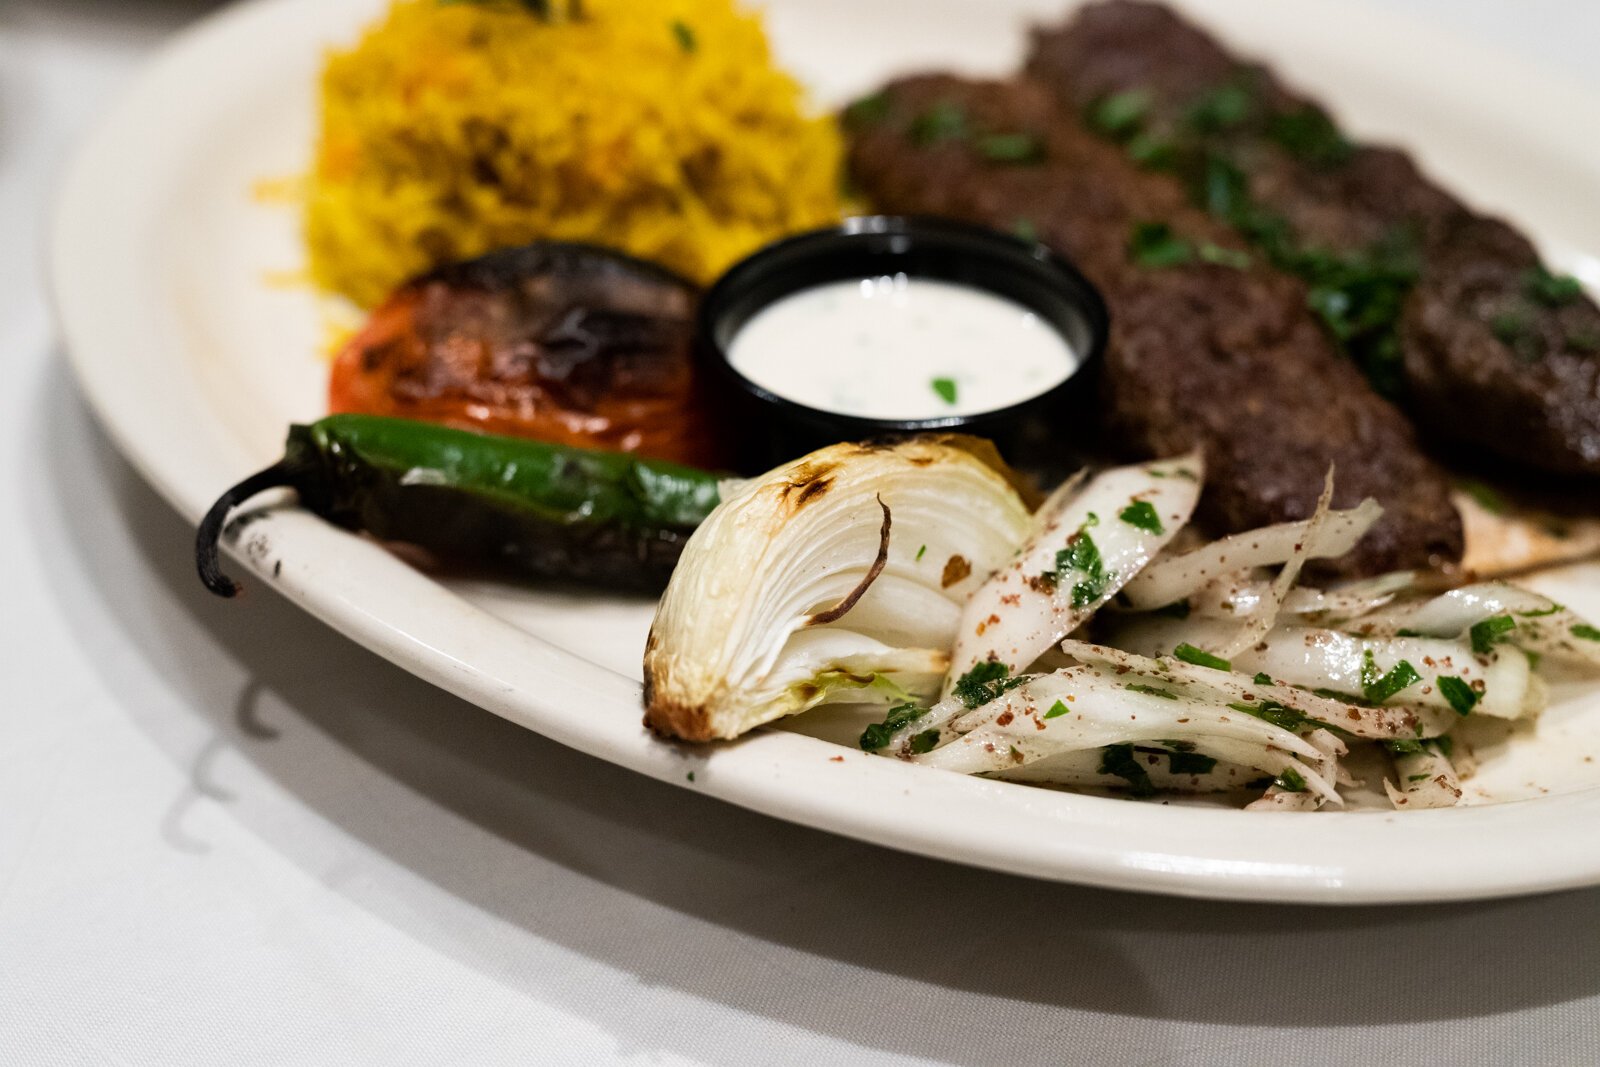 The Adana Beef Kebab is incredibly savory, tender, and well-spiced. It plays nicely with the nutty, slightly bitter tahini sauce it’s served with.